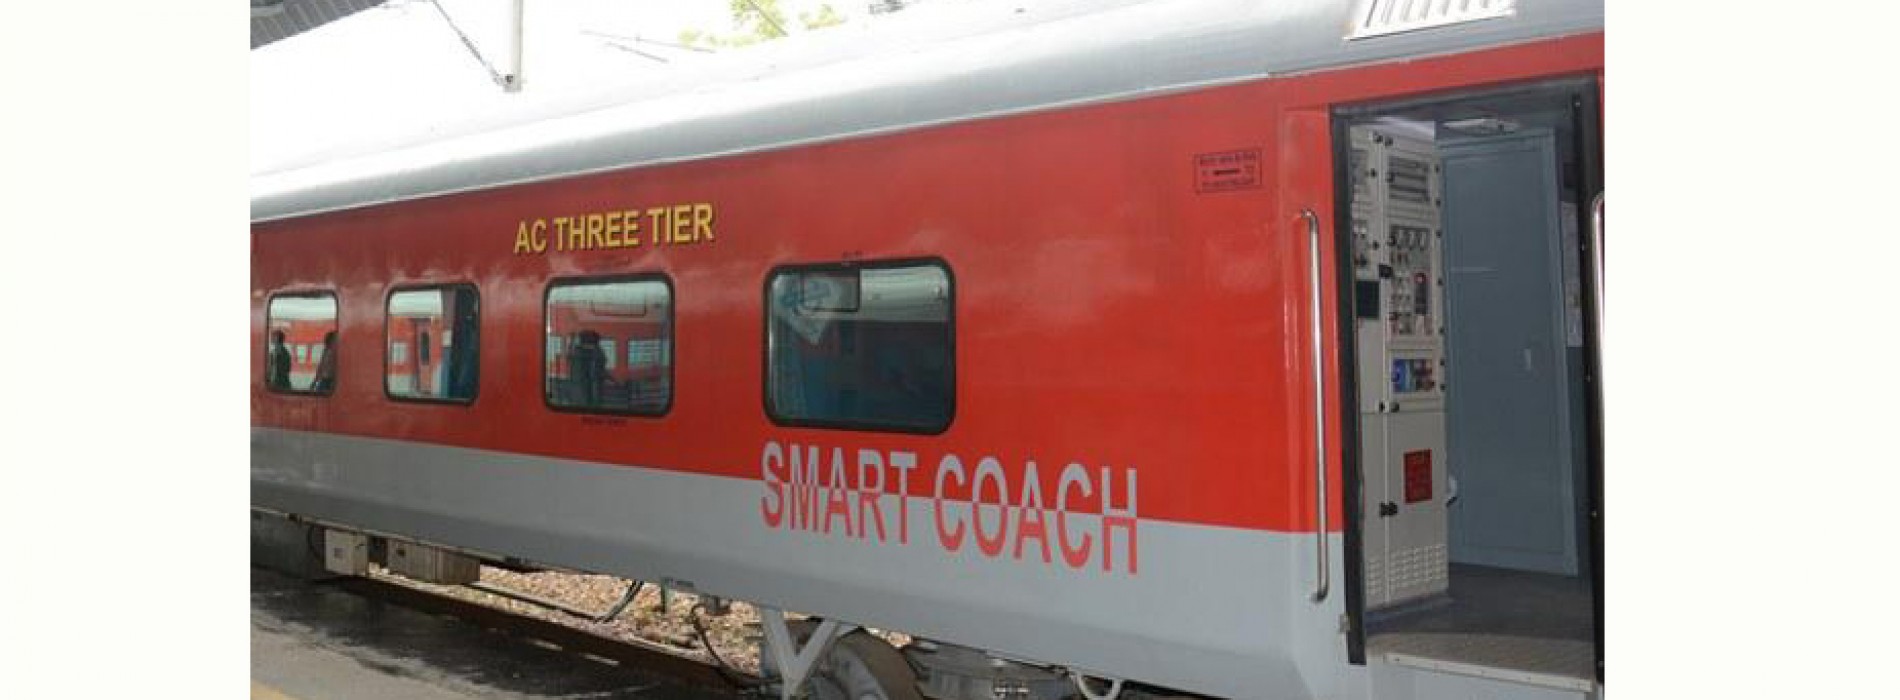 Indian Railways unveils country’s 1st smart coach